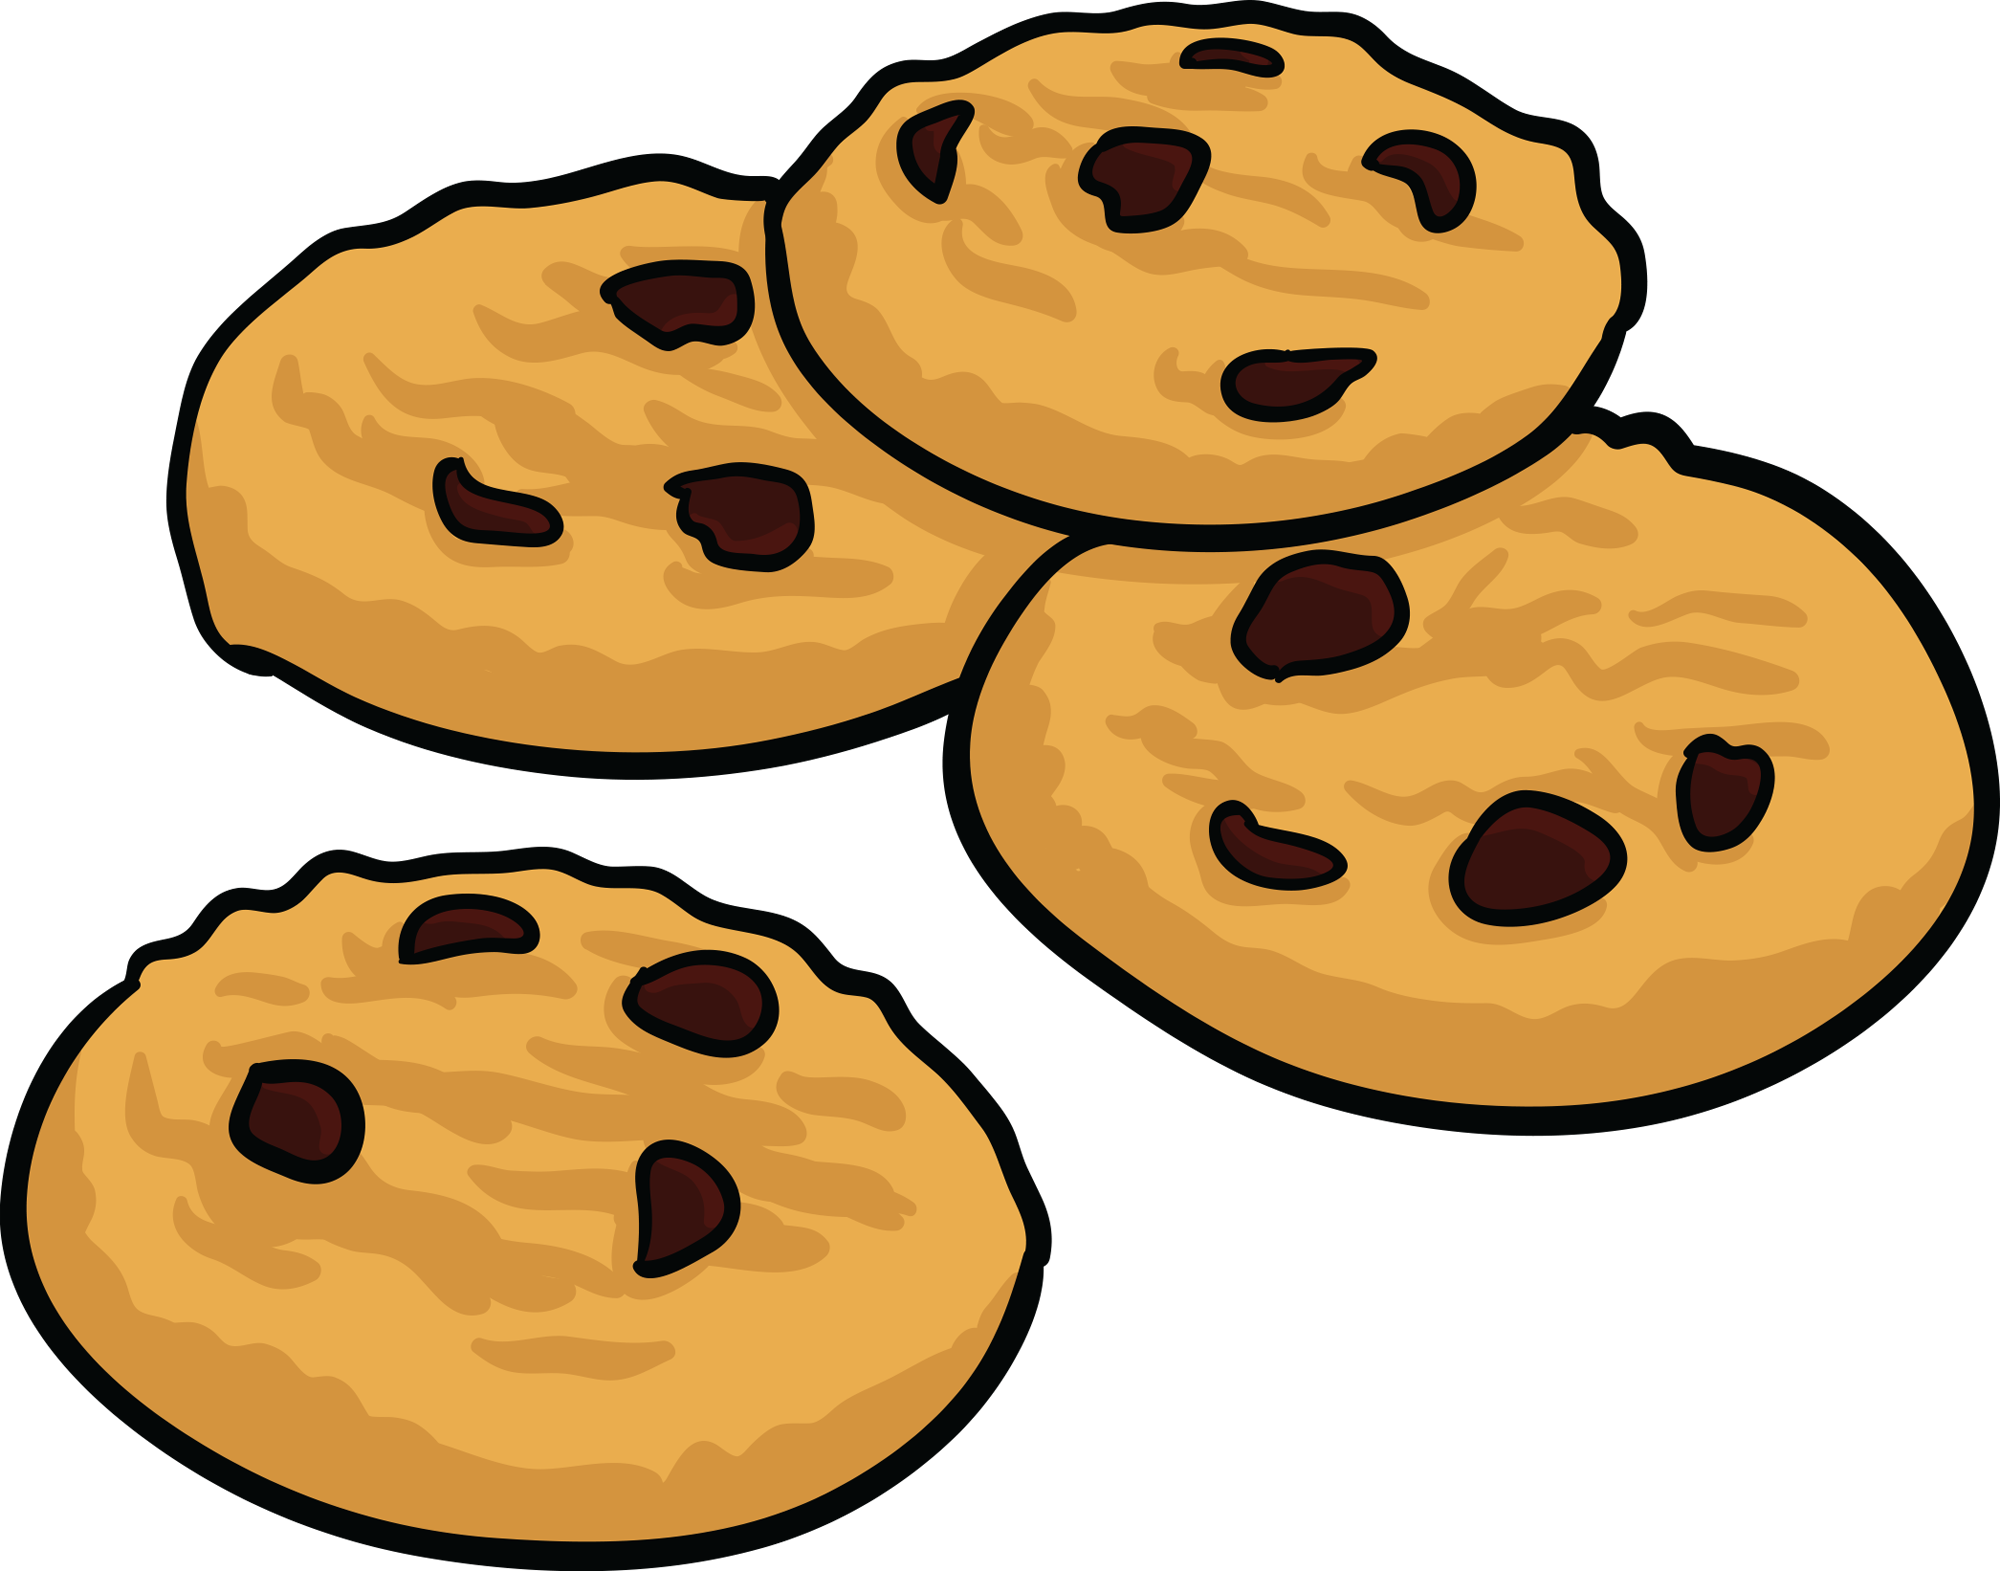 Cookies clipart oatmeal raisin cookie.  collection of free